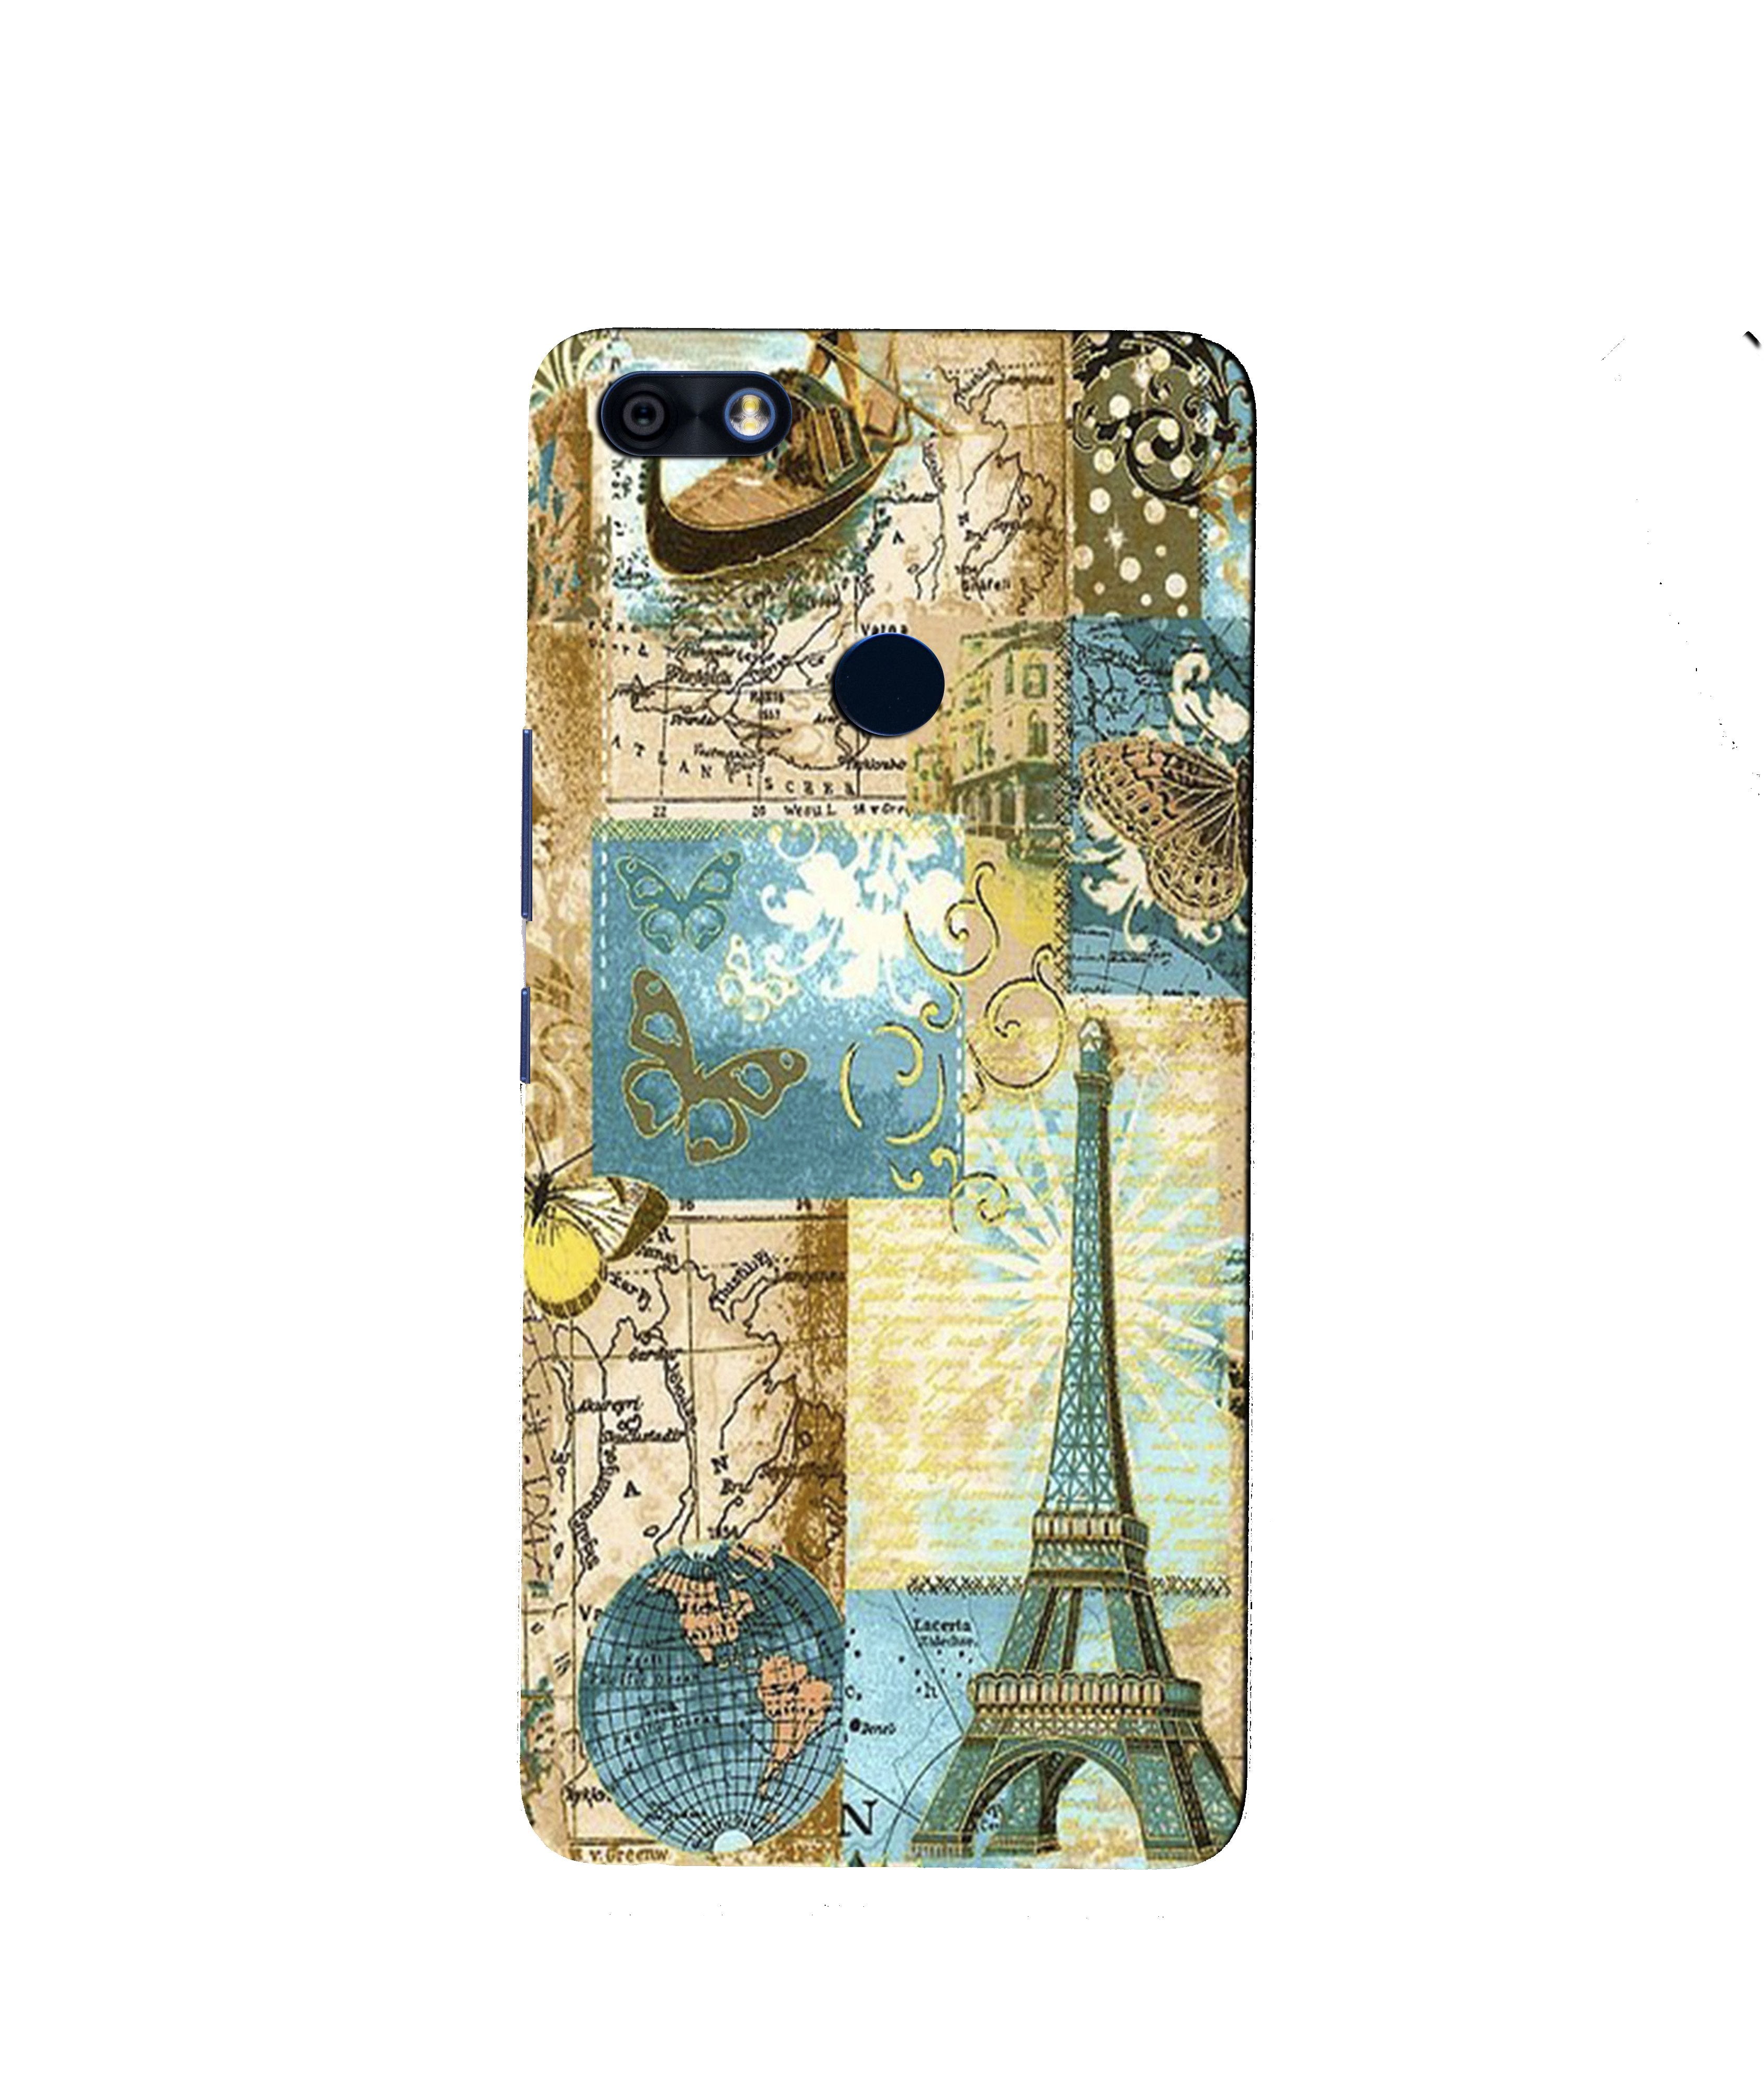 Travel Eiffel Tower Case for Infinix Note 5 / Note 5 Pro (Design No. 206)